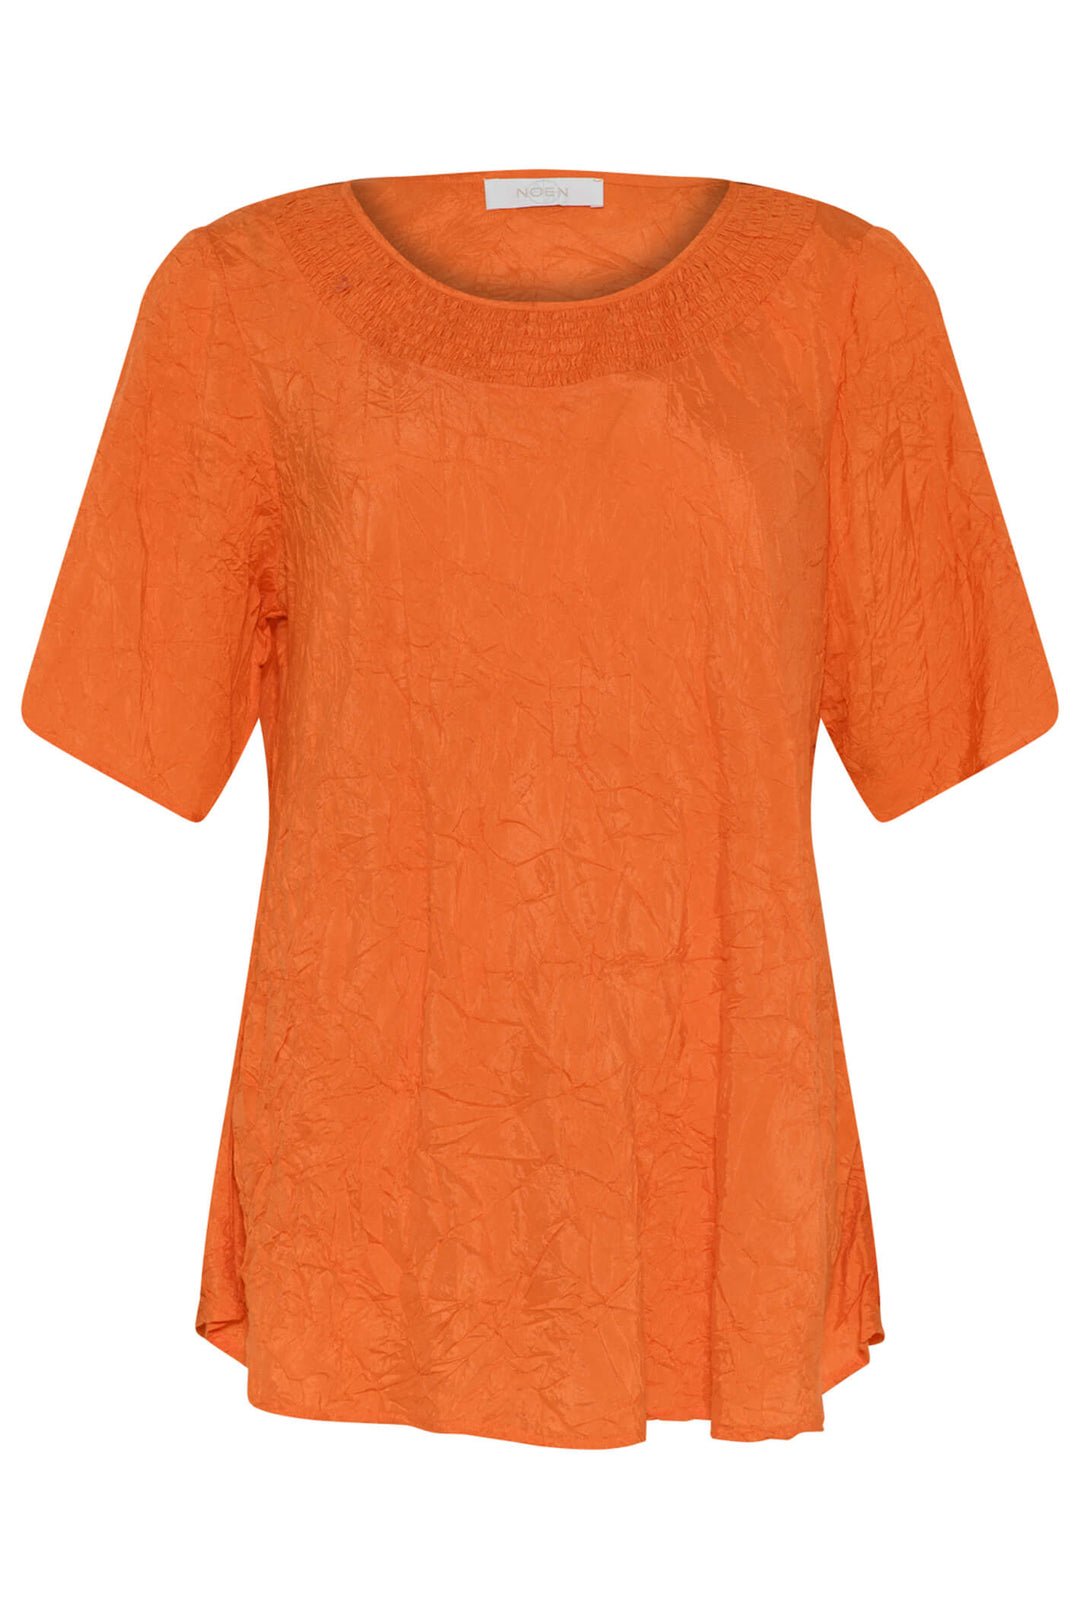 Noen 83373 81078 30 Orange Crushed Top - Experience Boutique